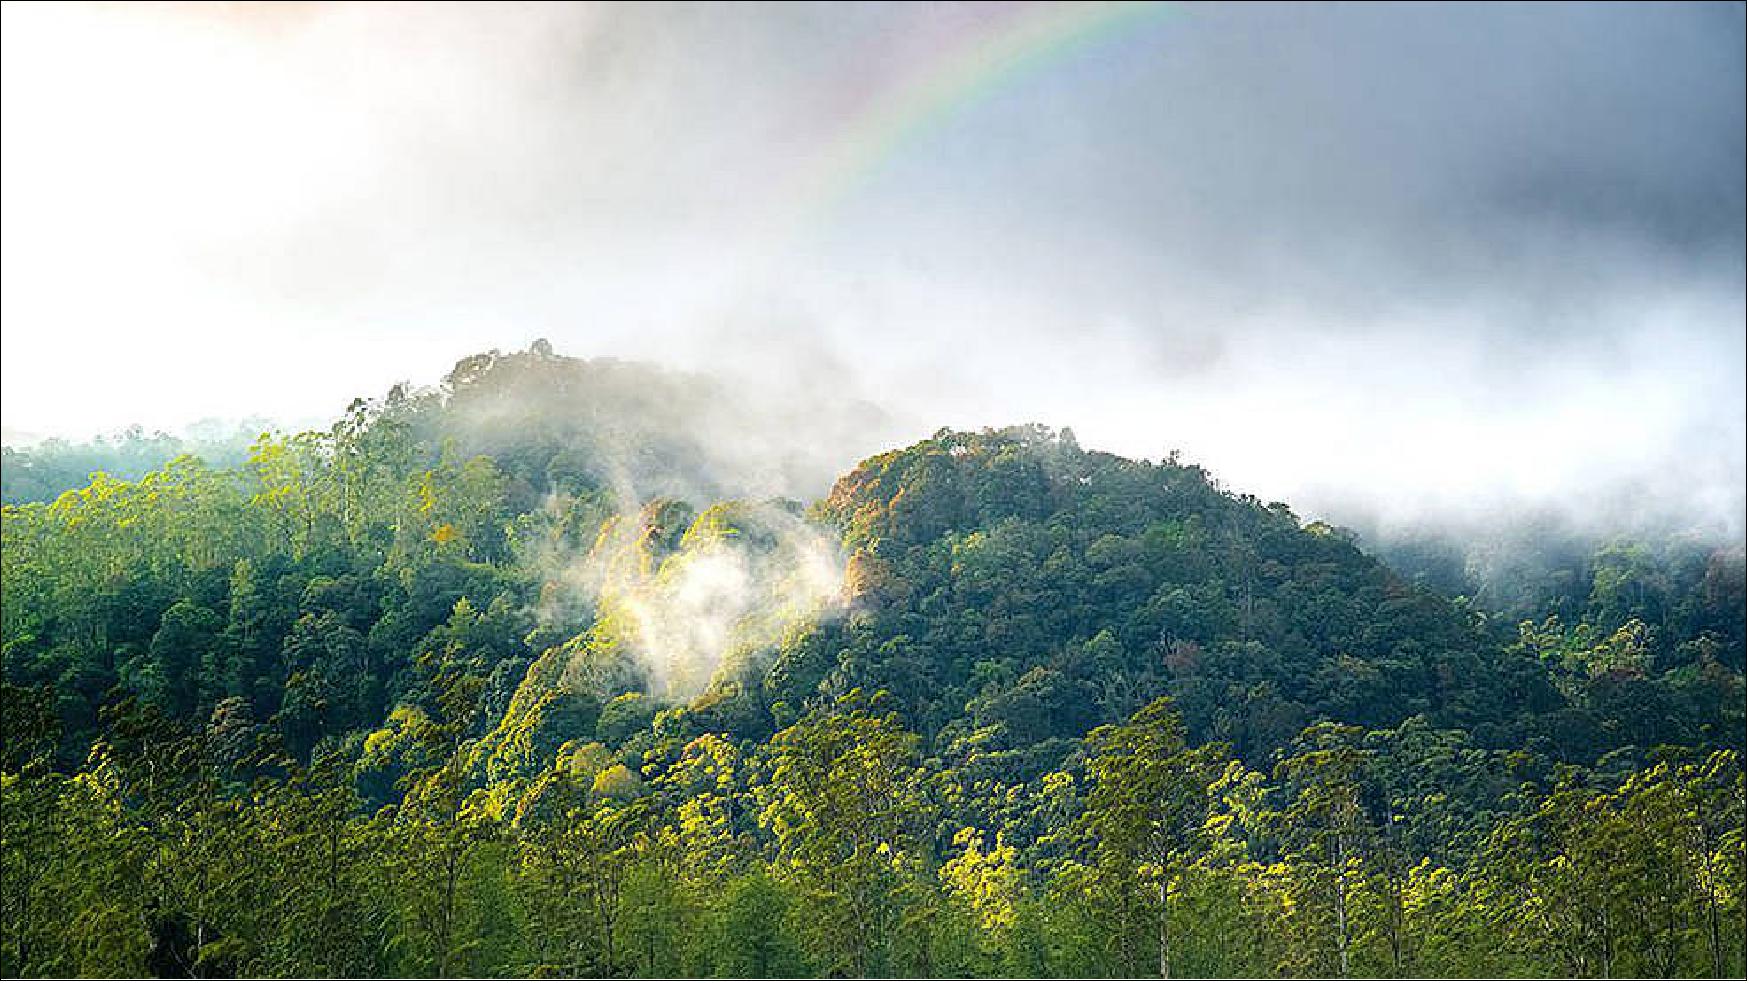 Figure 36: This image shows a forest giving off moisture into the air, or transpiring. When combined with moisture that evaporates from the land, both processes drive evapotranspiration, a key branch of the water cycle. As the climate warms, these processes are expected to intensify (image credit: © Acarapi / Adobe Stock)